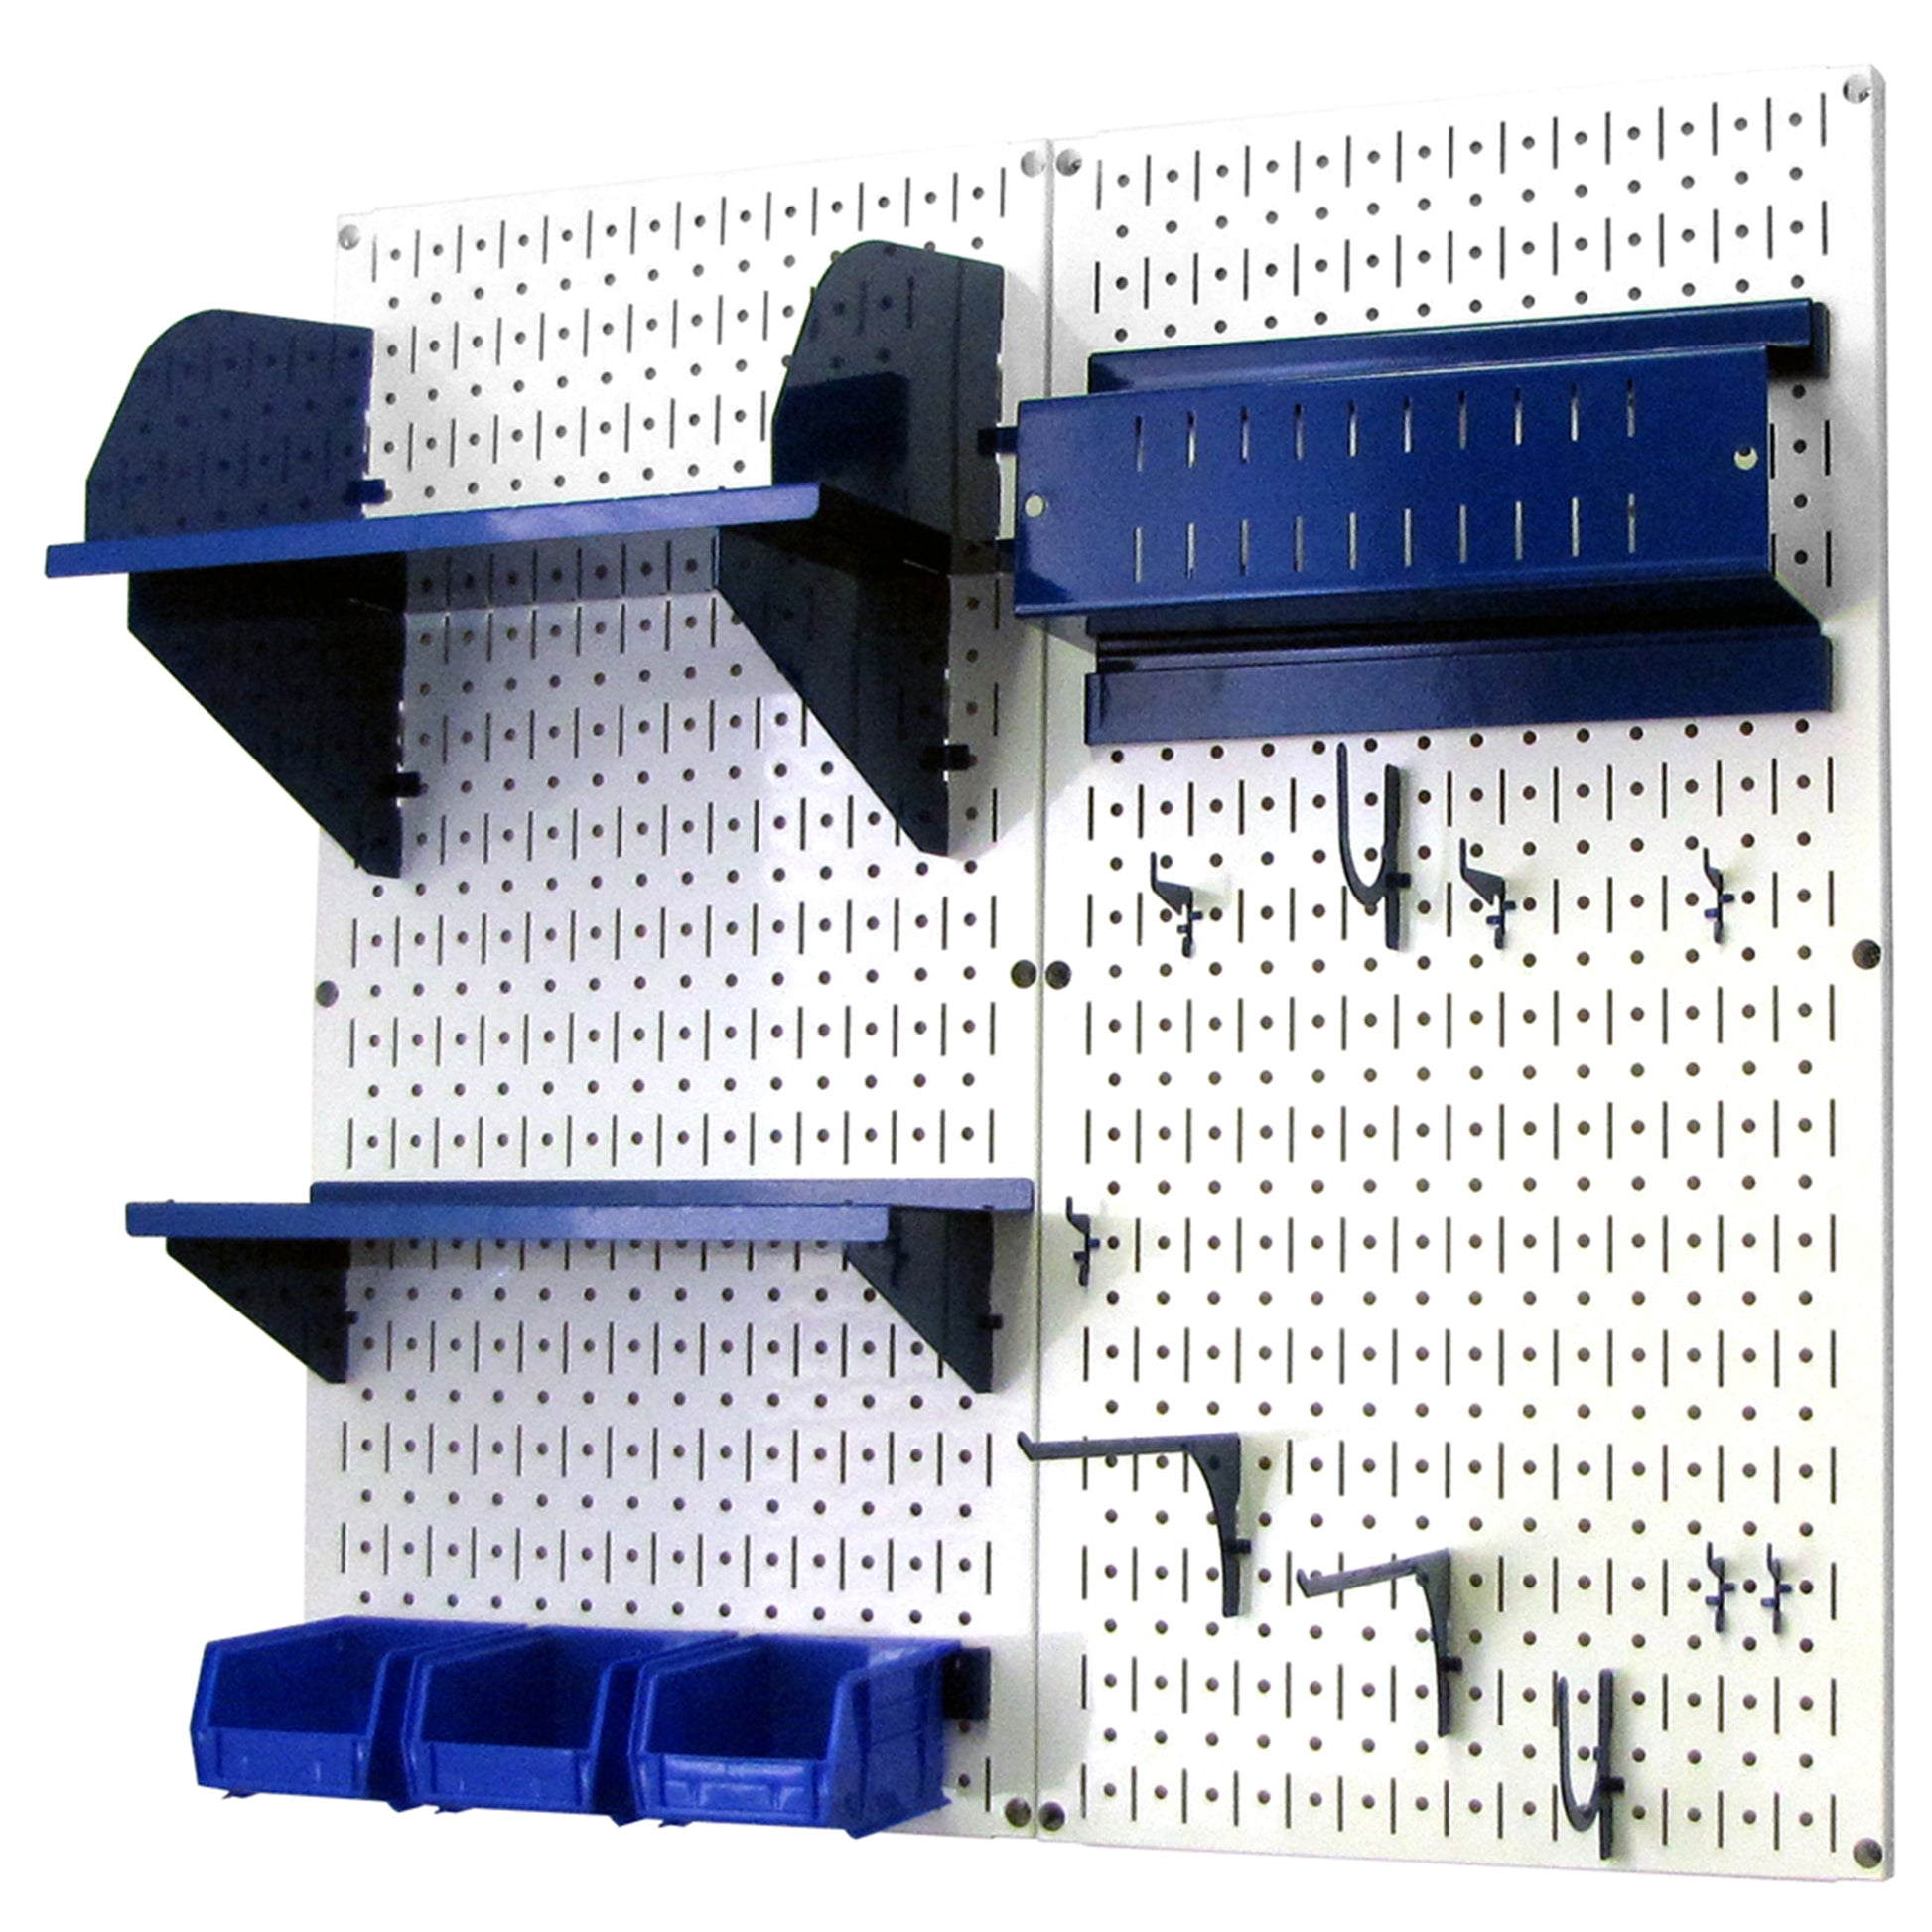 Wall Control Hobby Craft Pegboard Organizer Storage Kit; White and Blue